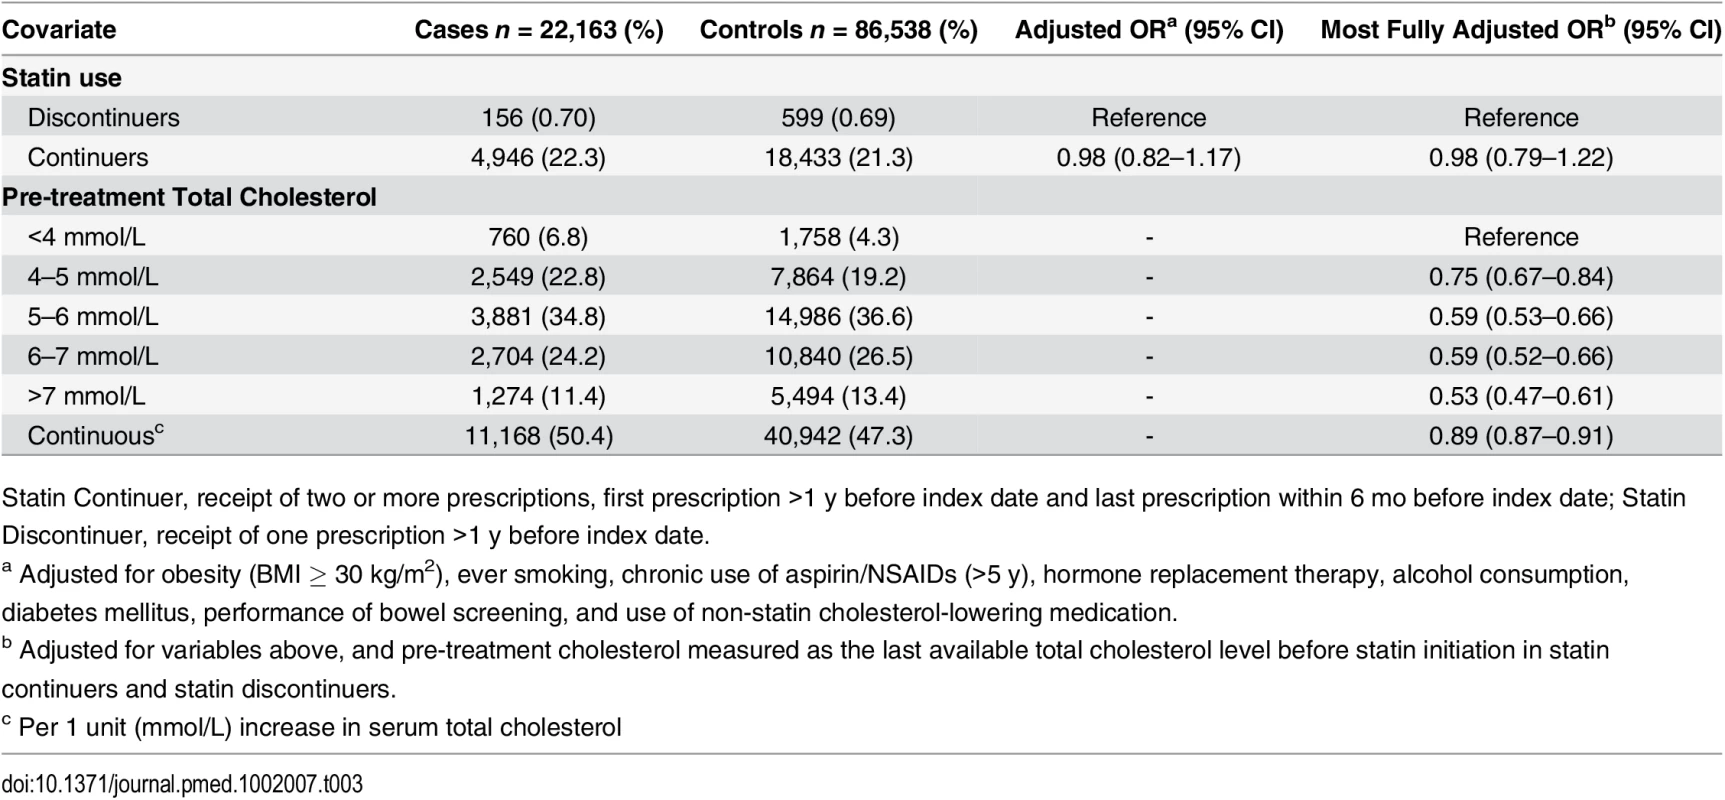 ORs for colorectal cancer risk in statin continuers relative to discontinuers, adjusting for pre-treatment total cholesterol.